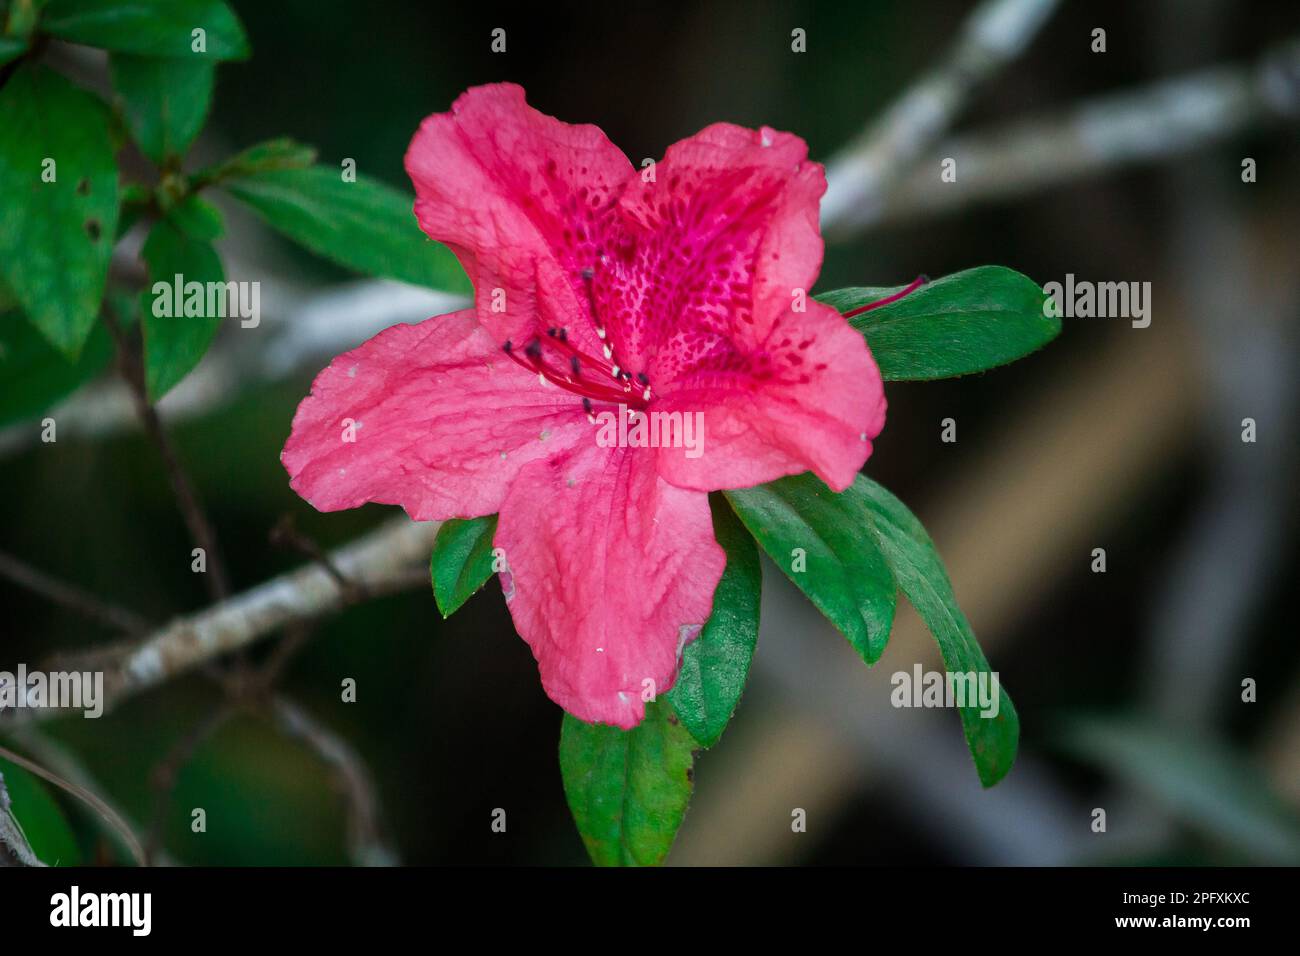 Azalea is blooming for beautiful flowers during the cold season. Azalea is the family name of a flowering plant in the genus Rhododendron. Stock Photo